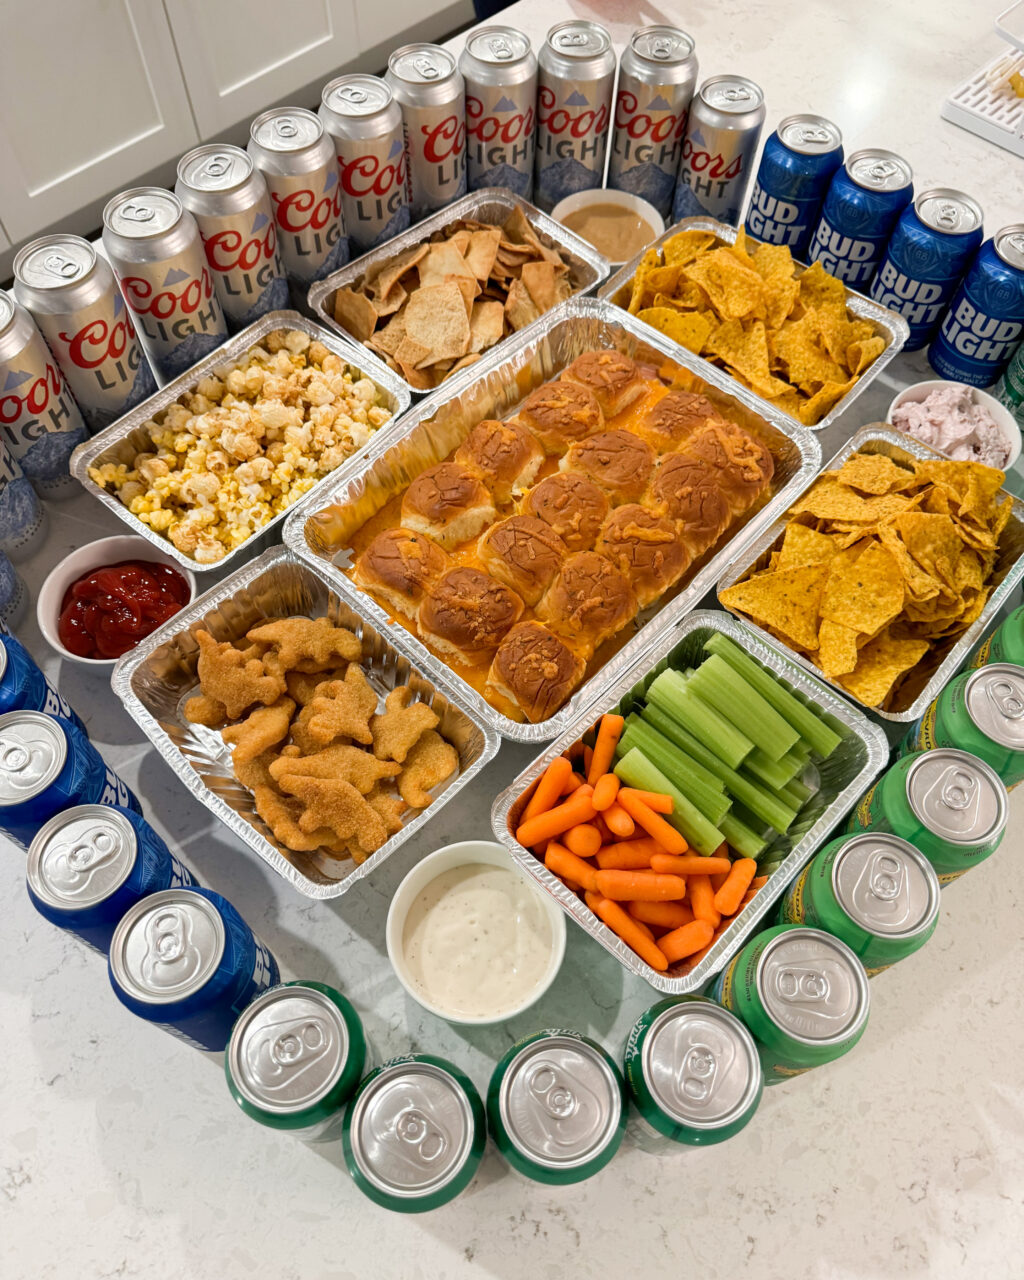 DIY snack stadium without foam board, game day snack display, football watch party food set up, football food